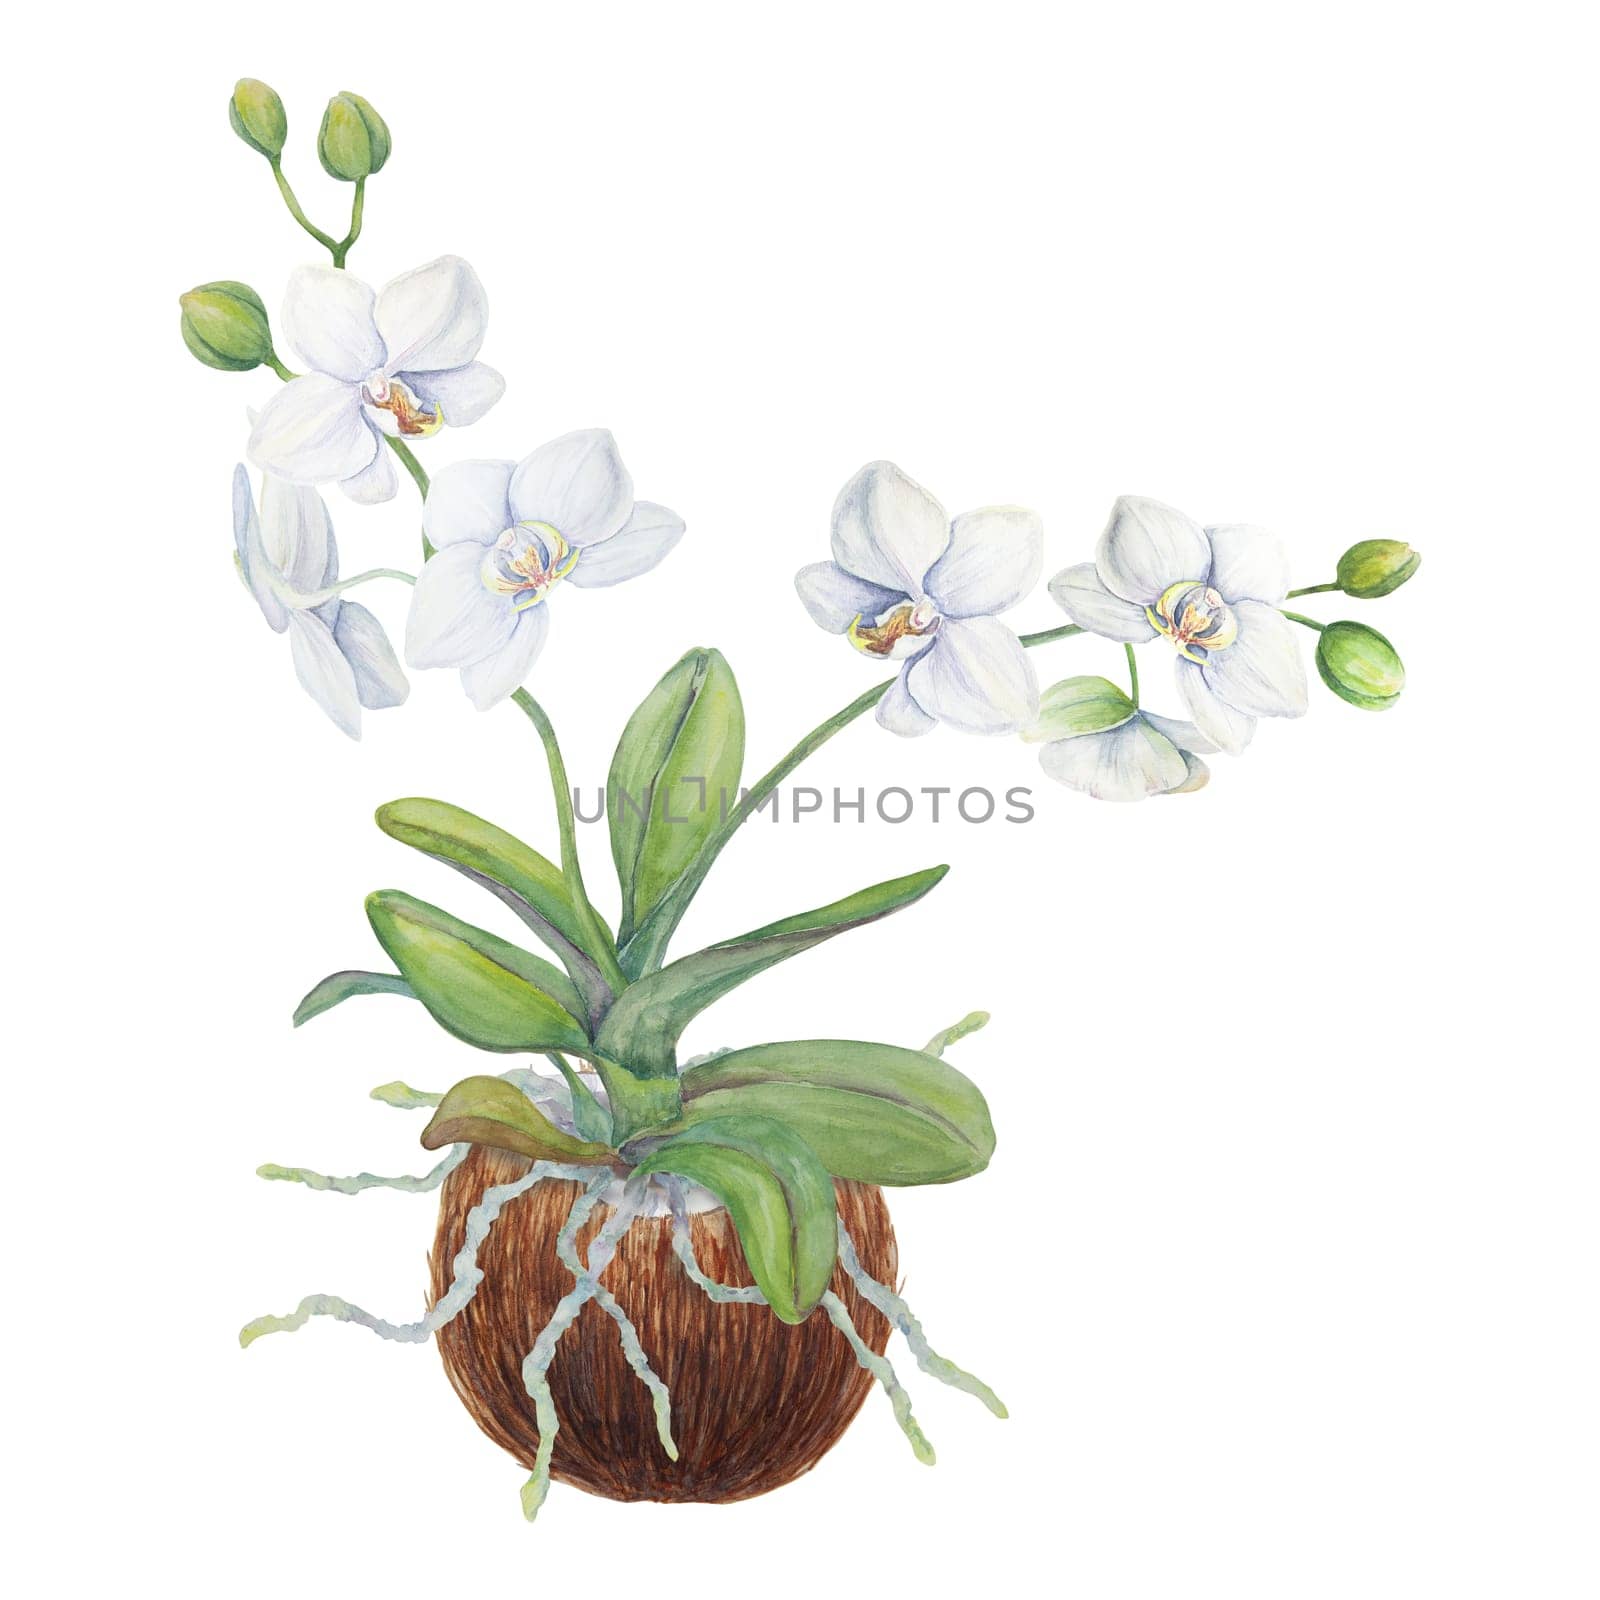 White orchid flowers with roots in coconut. Delicate botanical watercolor hand drawn illustration. Clipart for invitations, textiles, gifts, packaging, floristry